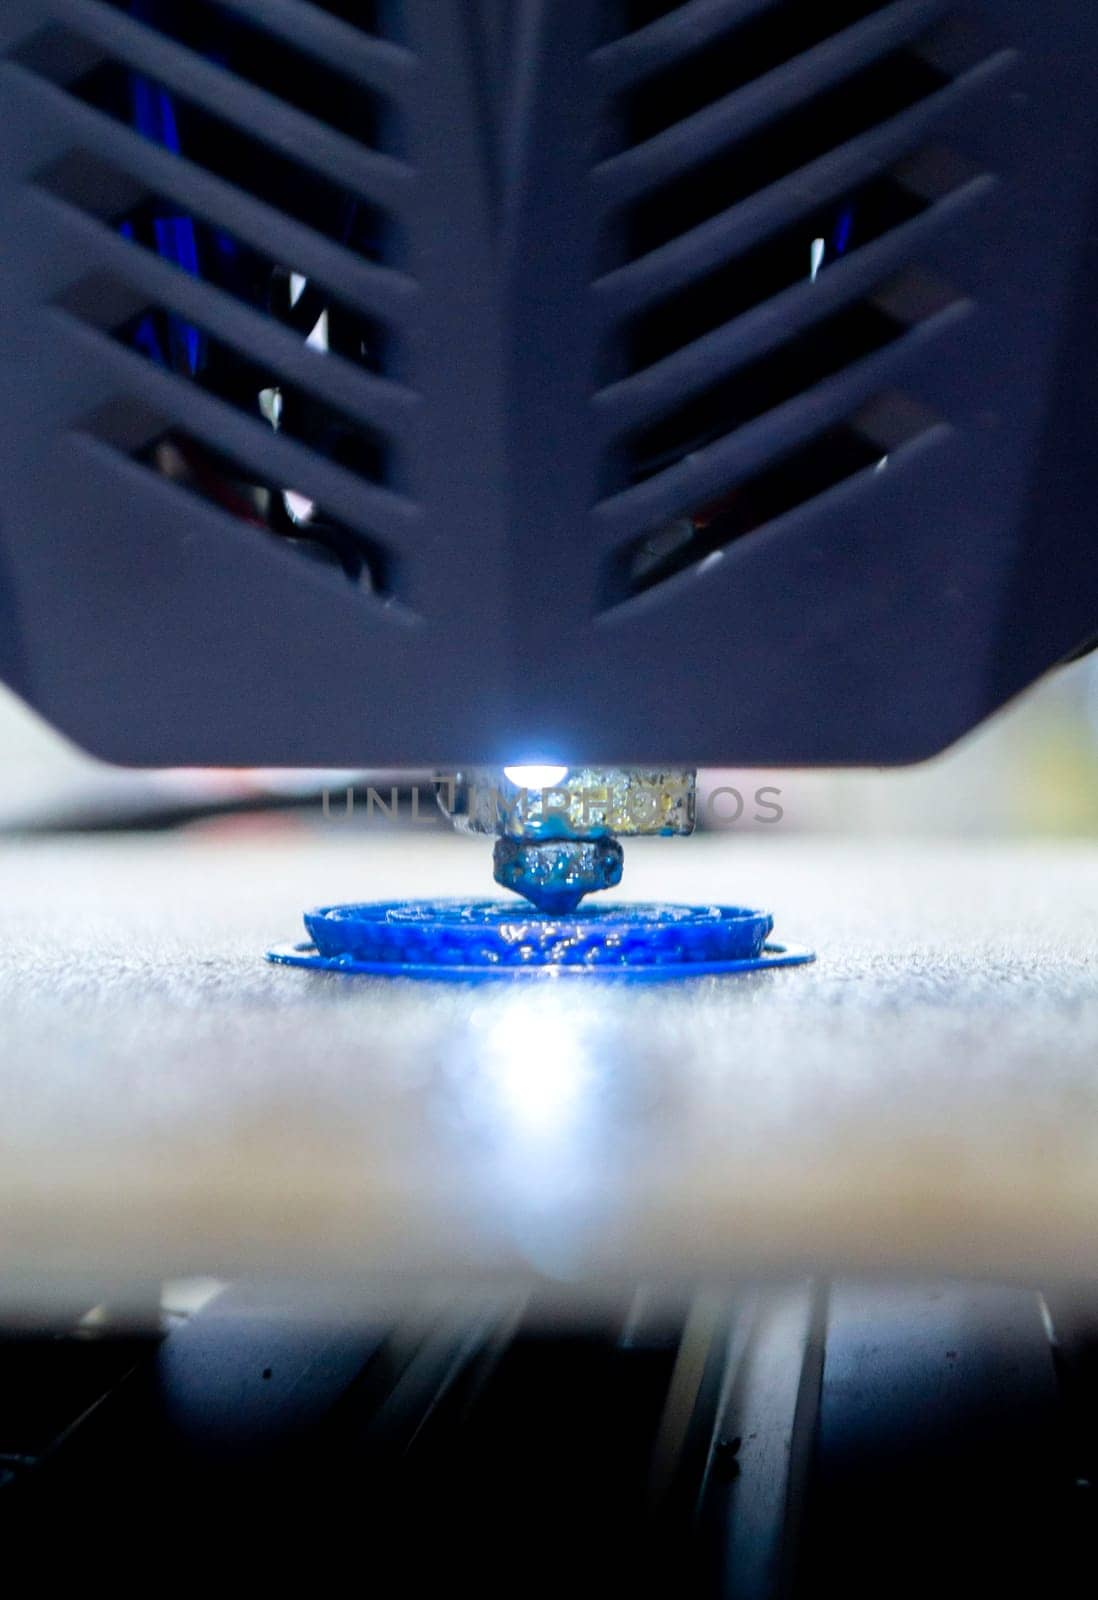 Working 3D printer printing object from blue plastic. Printing model from molten plastic using a 3D printer. Creation of a form by a 3D printer. Additive progressive new modern 3d printer technology